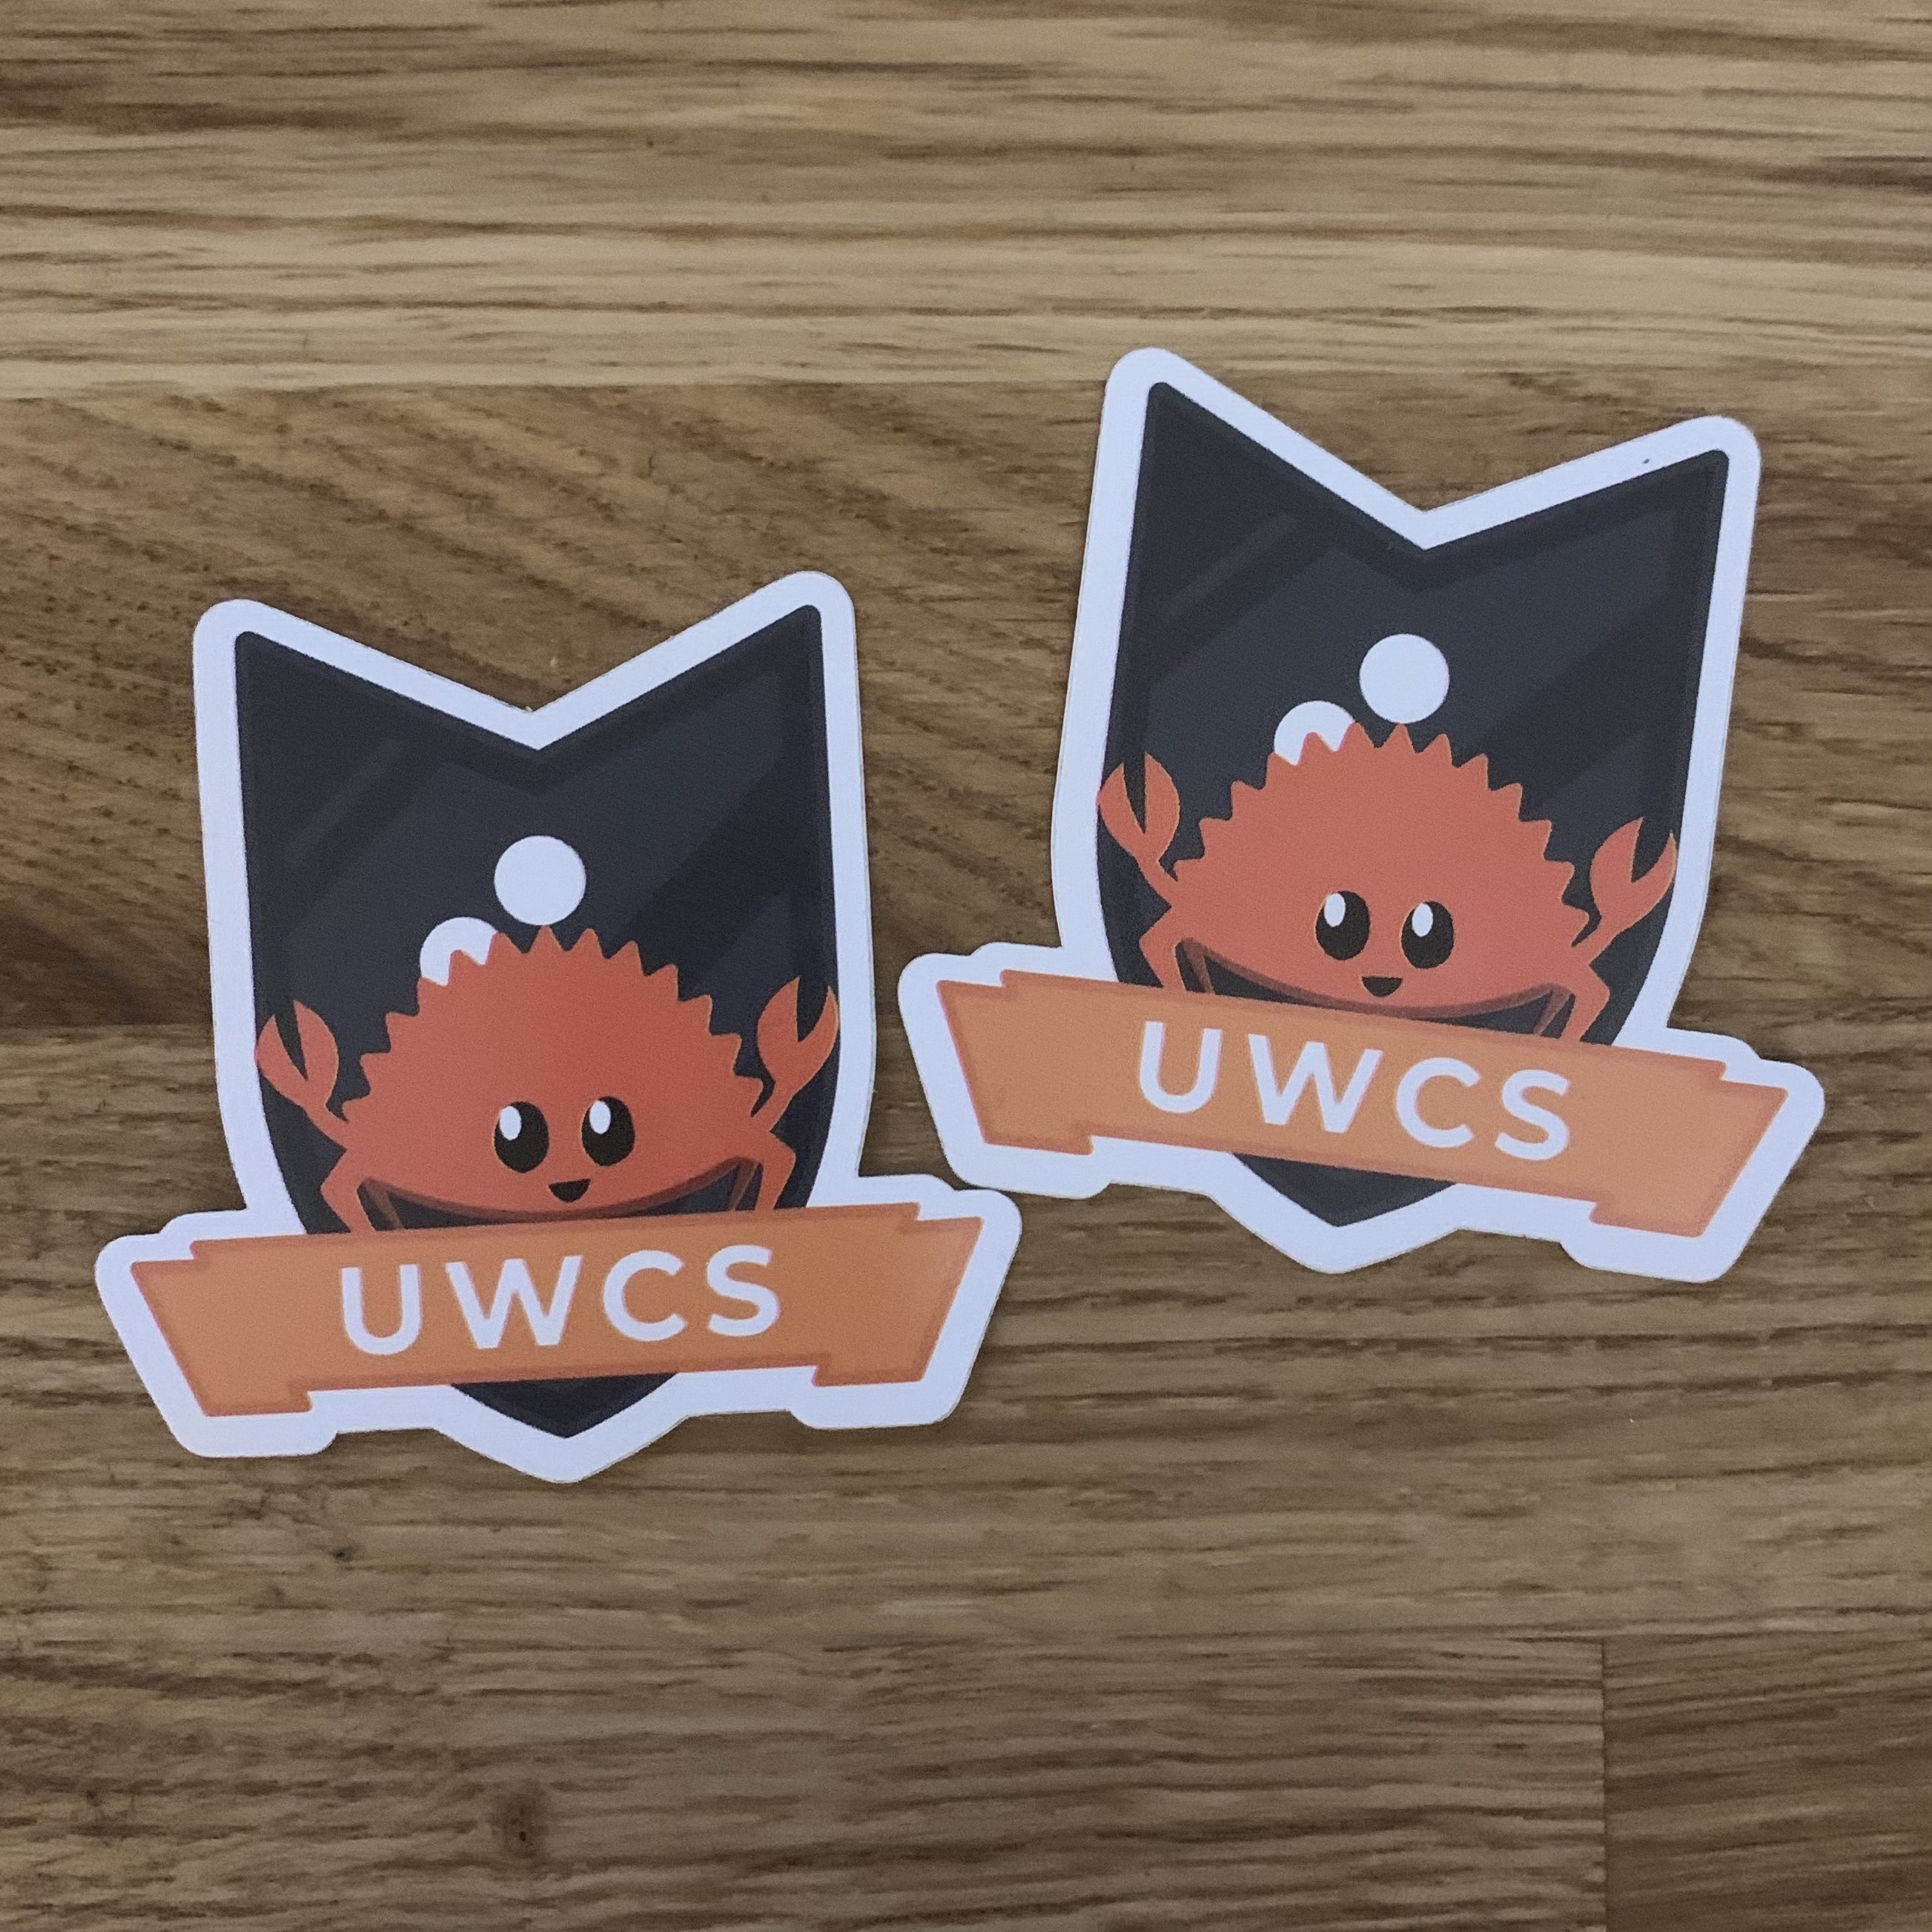 Stickers of the UWCS logo with Ferris the crab on them